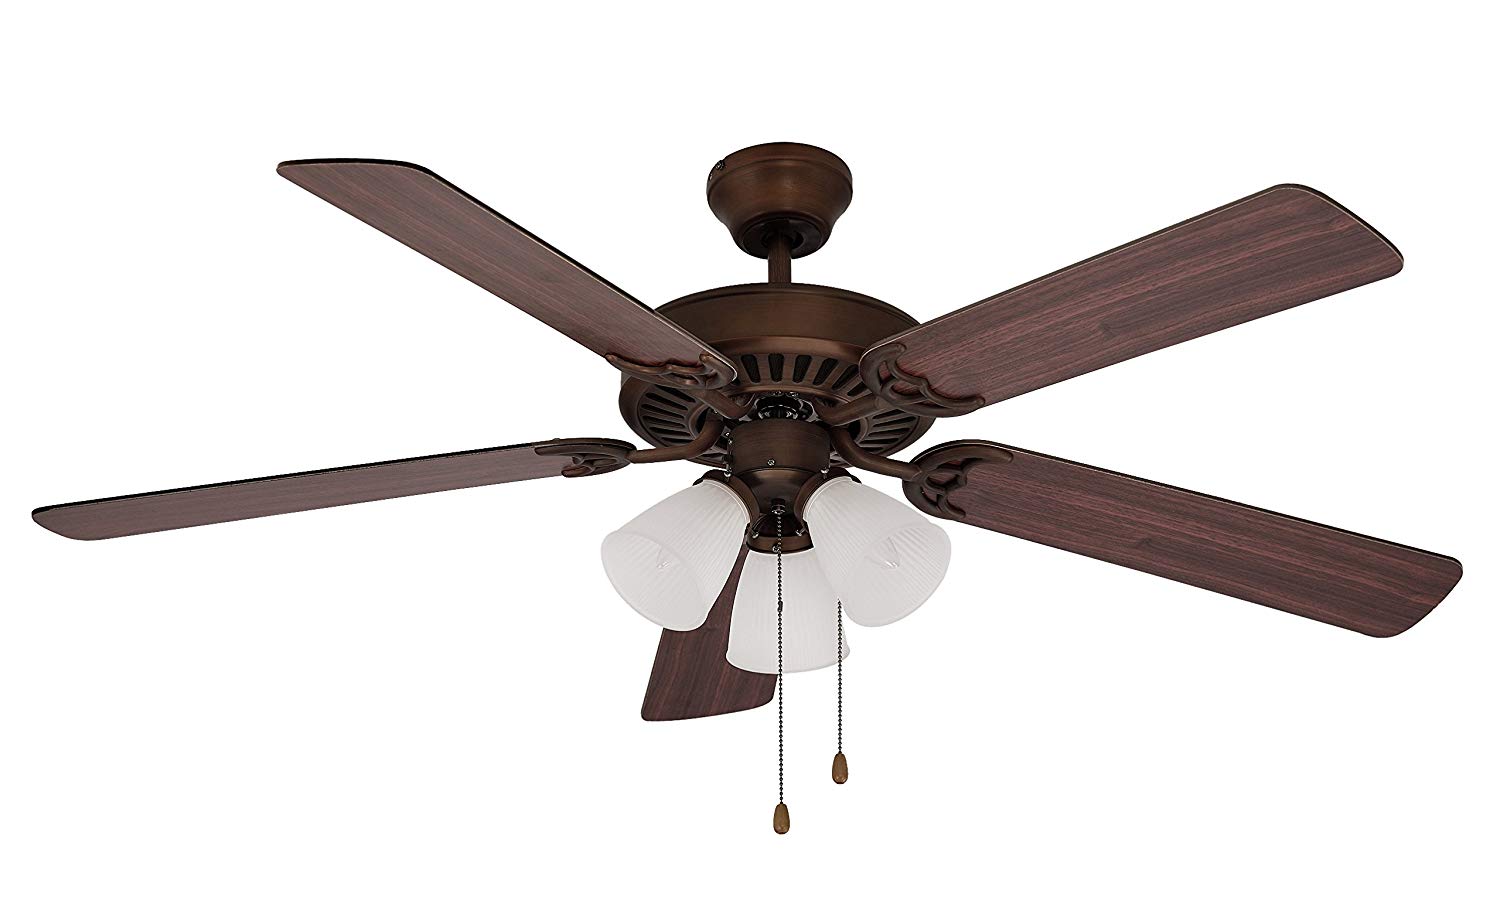 Trans Globe Lighting-F-1005 ROB-Tempa Breeze - 52 Inch Ceiling Fan with Light Kit   Rubbed Oil Bronze Finish with Rosewood Blade Finish with White Frosted Glass